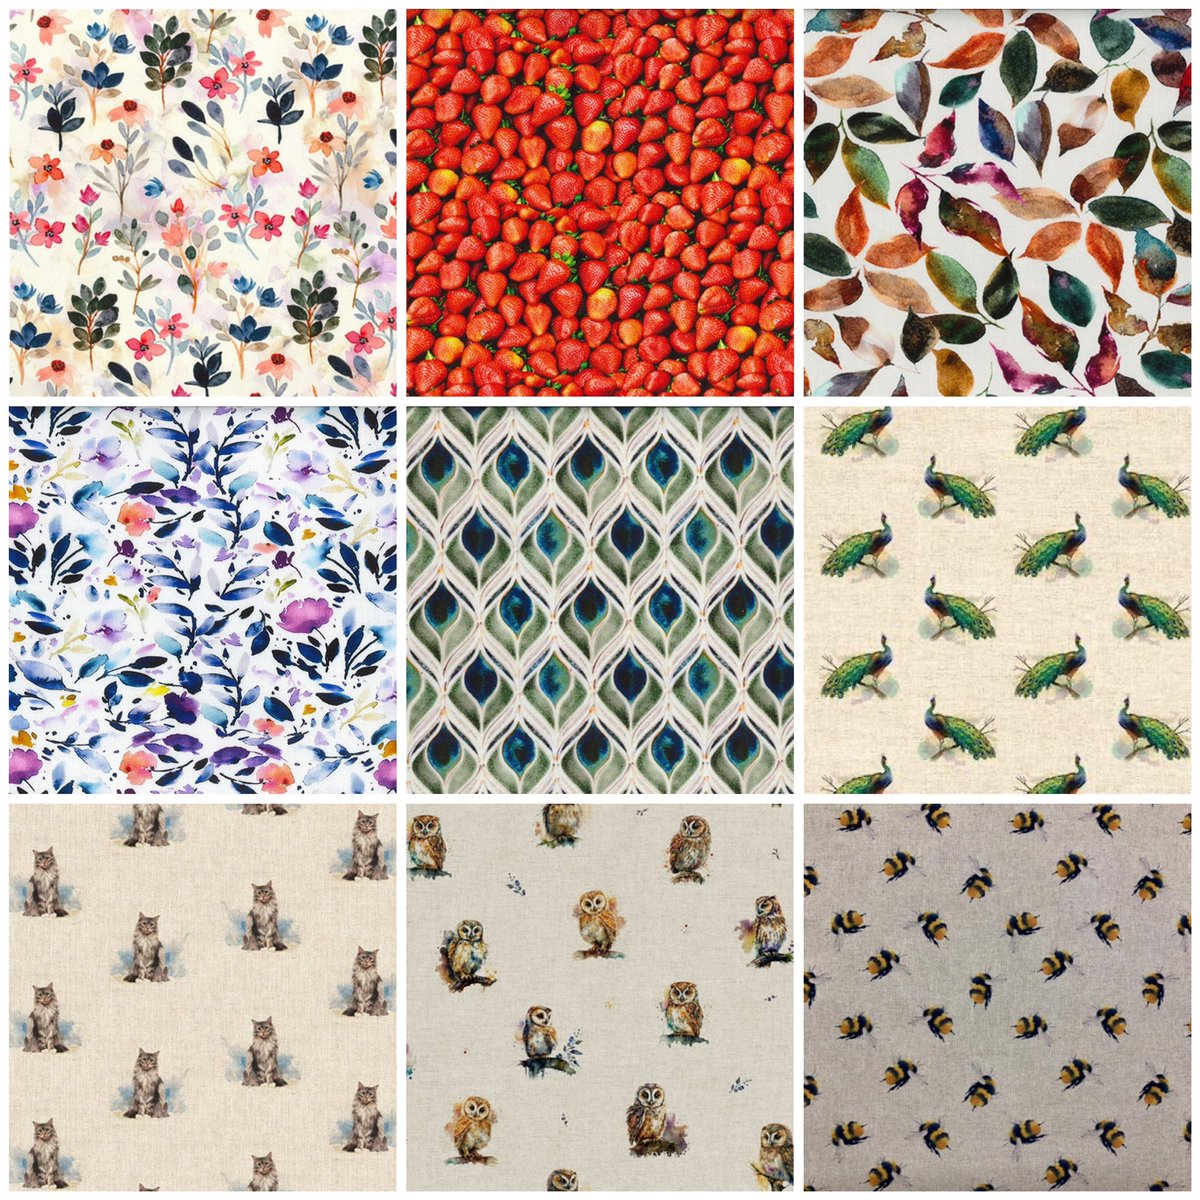 Canvas Fabric Online and In Store
#canvas #canvasfabric #printedcanvas #canvasprint #sewingfabric #homesewing #cottonmaterial #cottonfabric #cotton #fabriclove #fabricshop #onlinefabricshop #sewing remnanthousefabric.co.uk/product-catego…